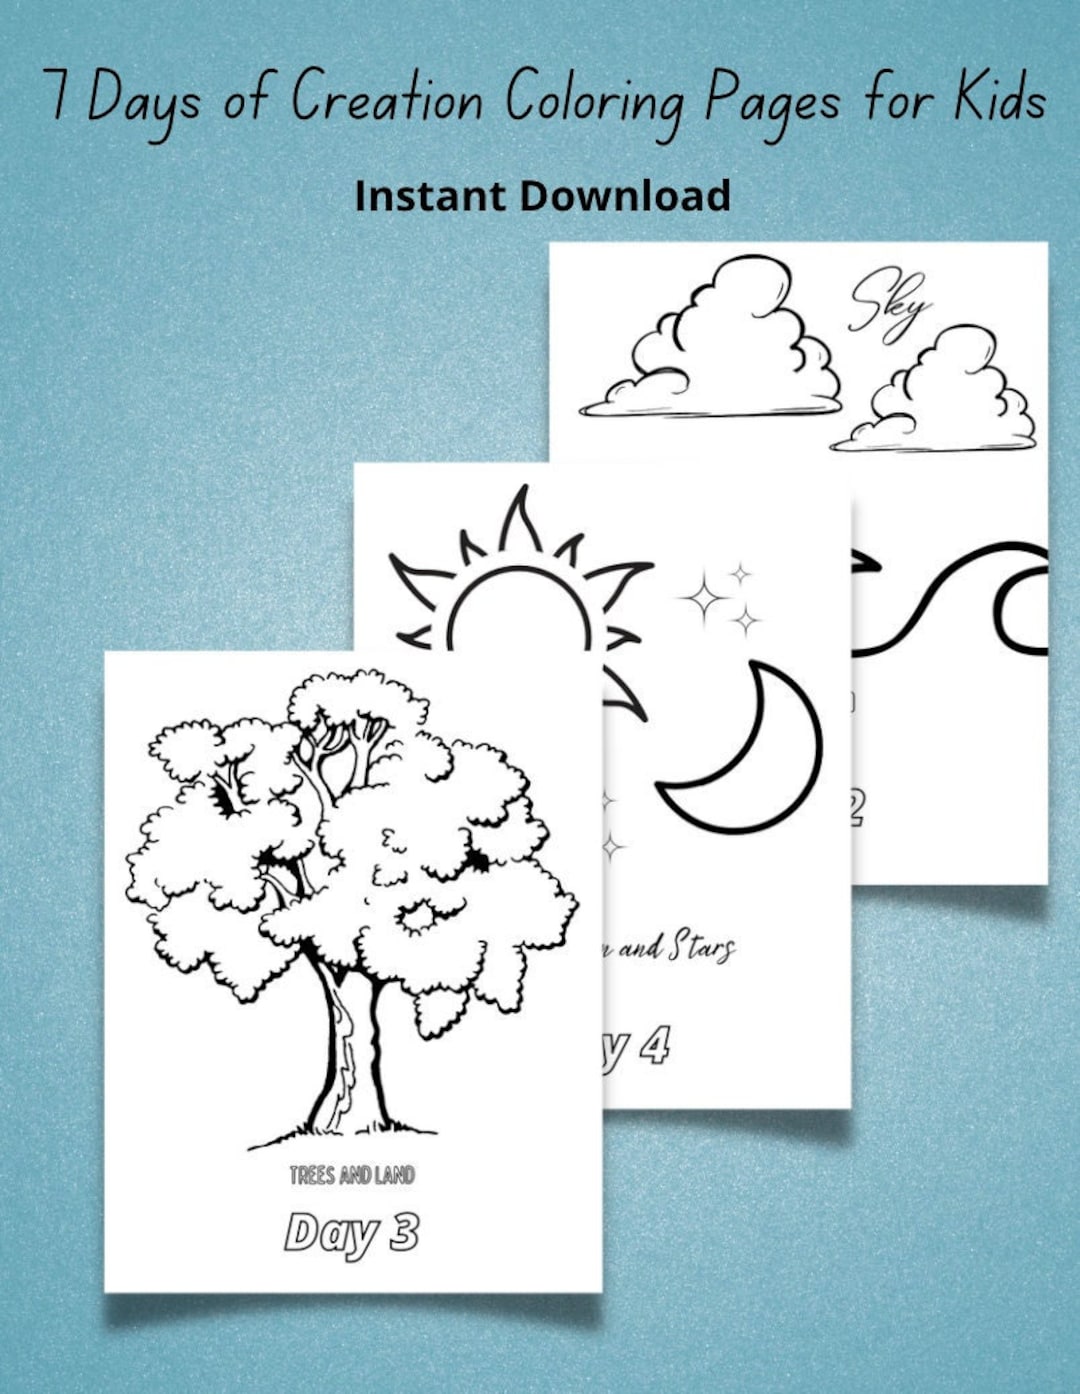 Days of creation coloring pages for kids instant download and printable